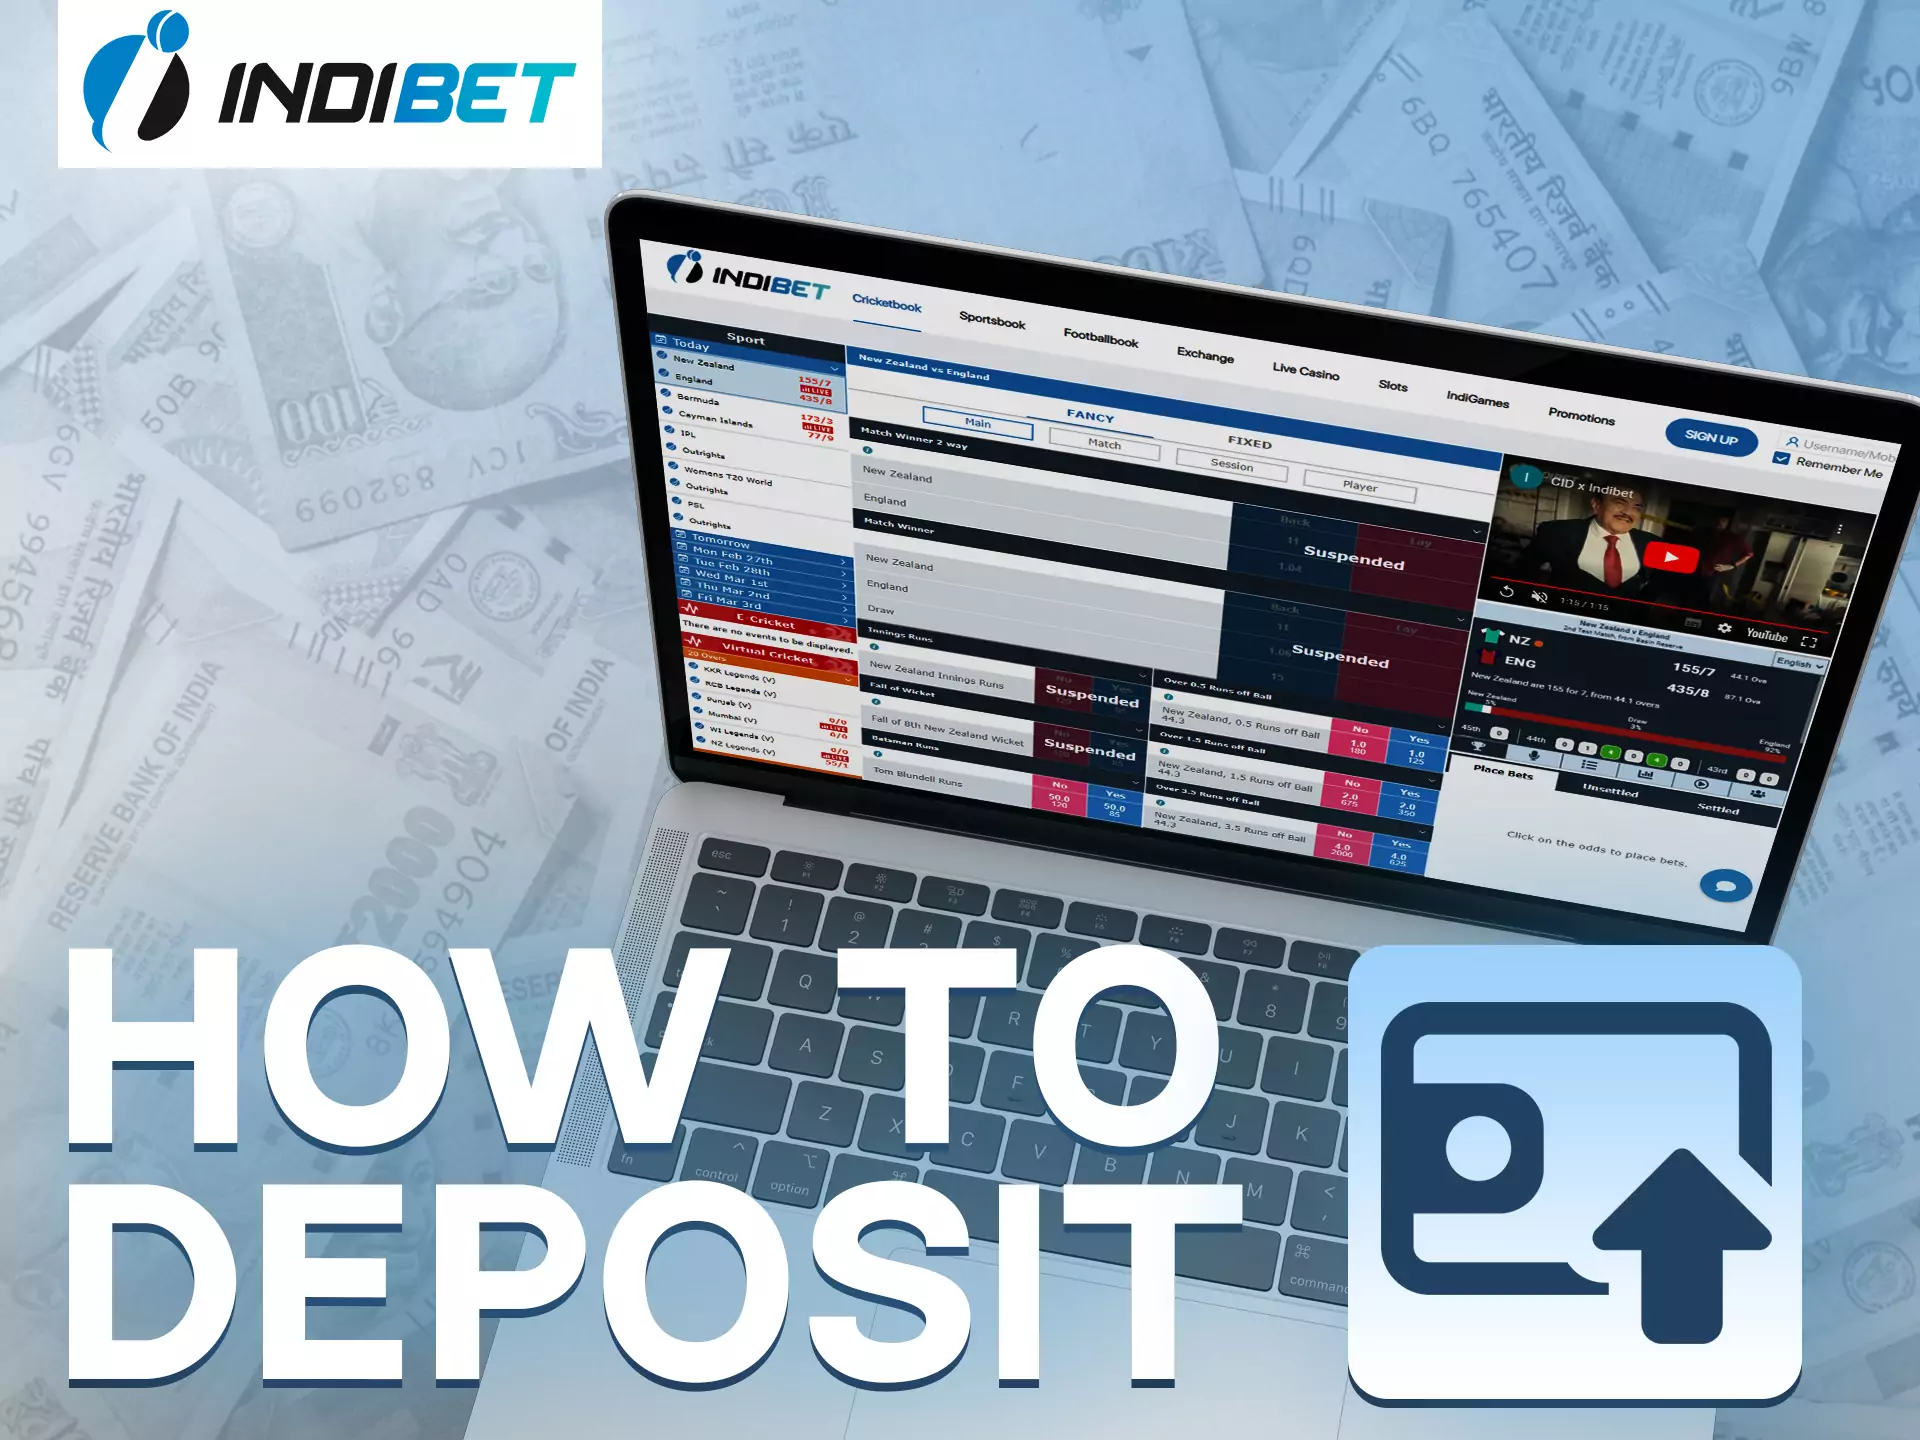 At Indibet it's very easy to deposit your account.